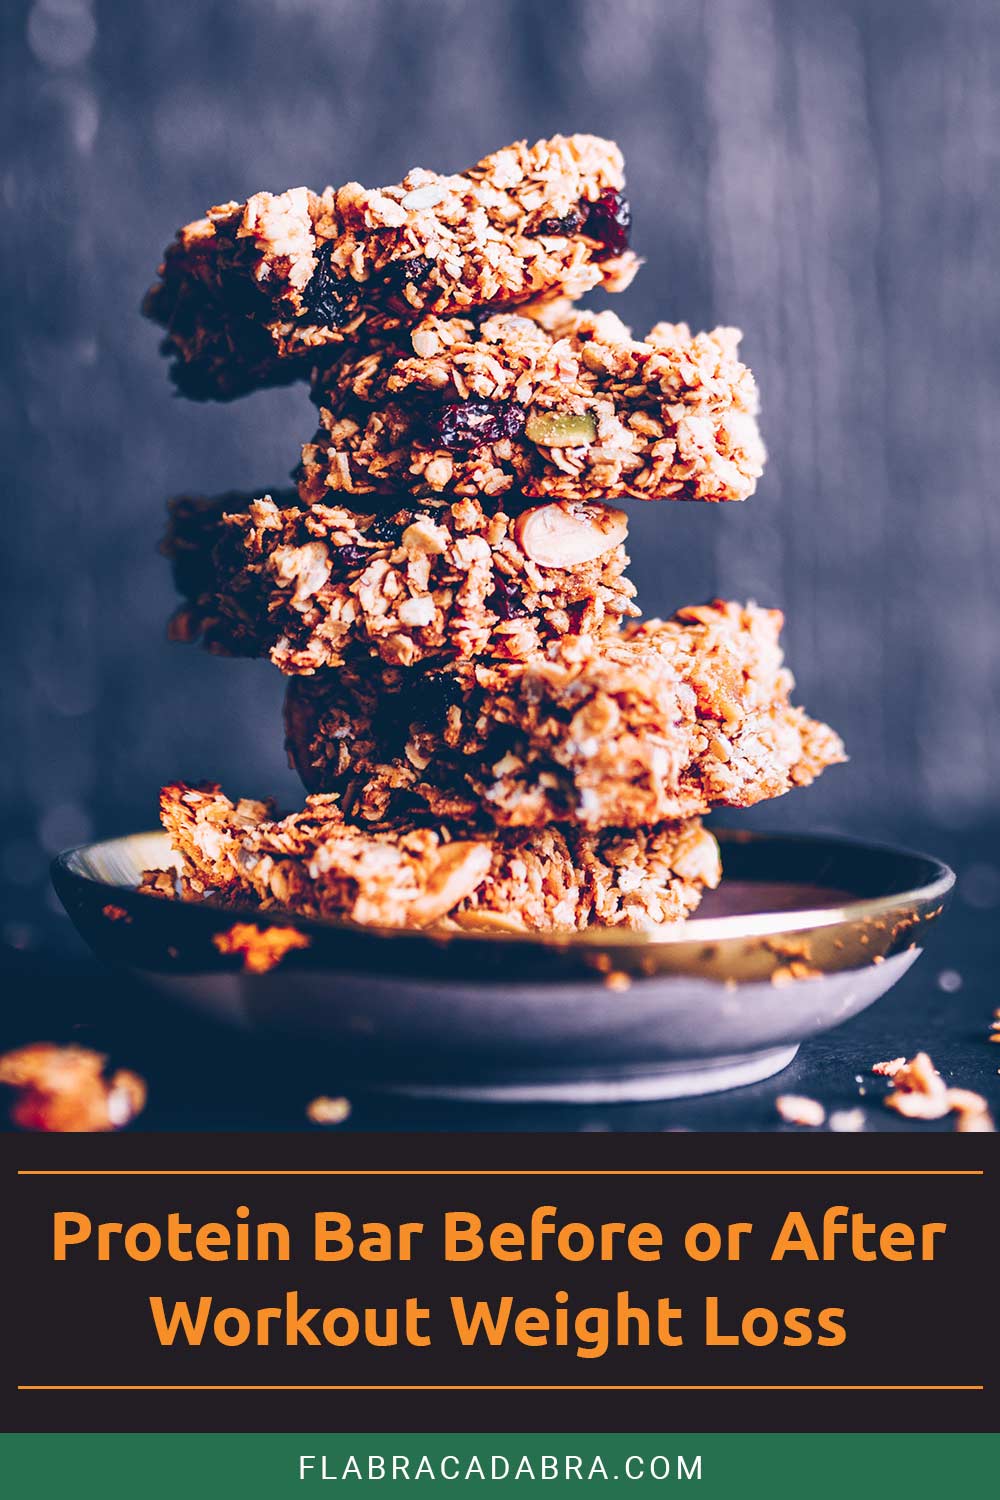 Protein Bar Before or After Workout Weight Loss